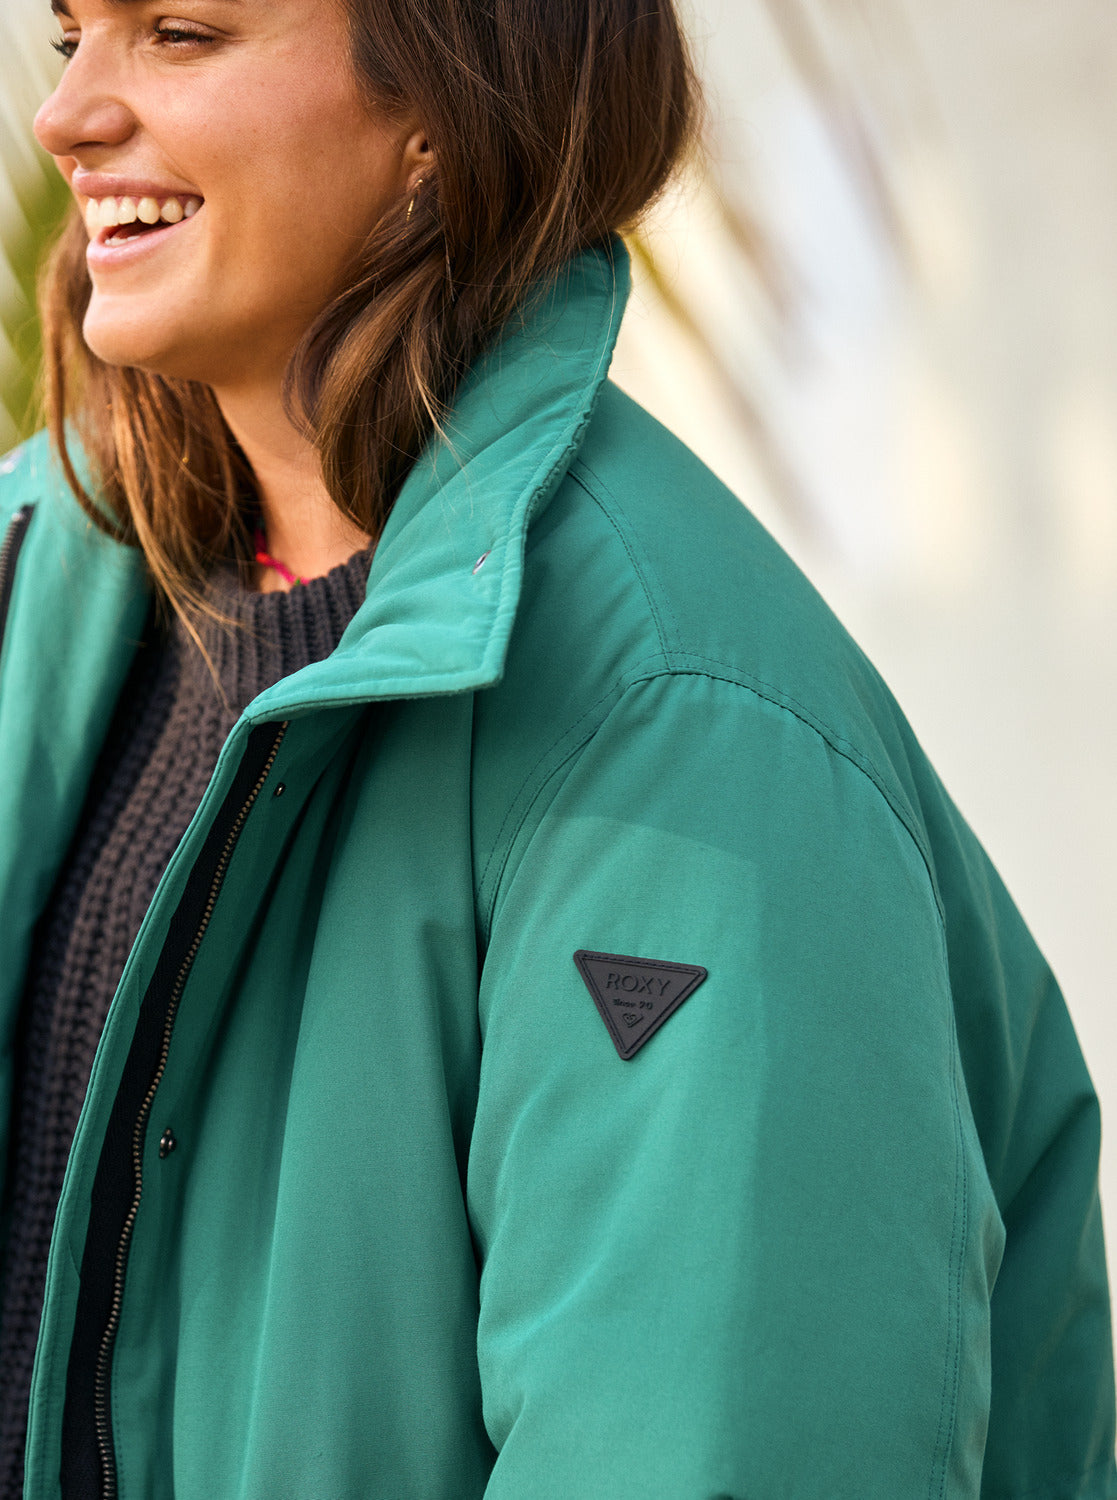 Roxy This Time Puffer Jacket Galapagos Green